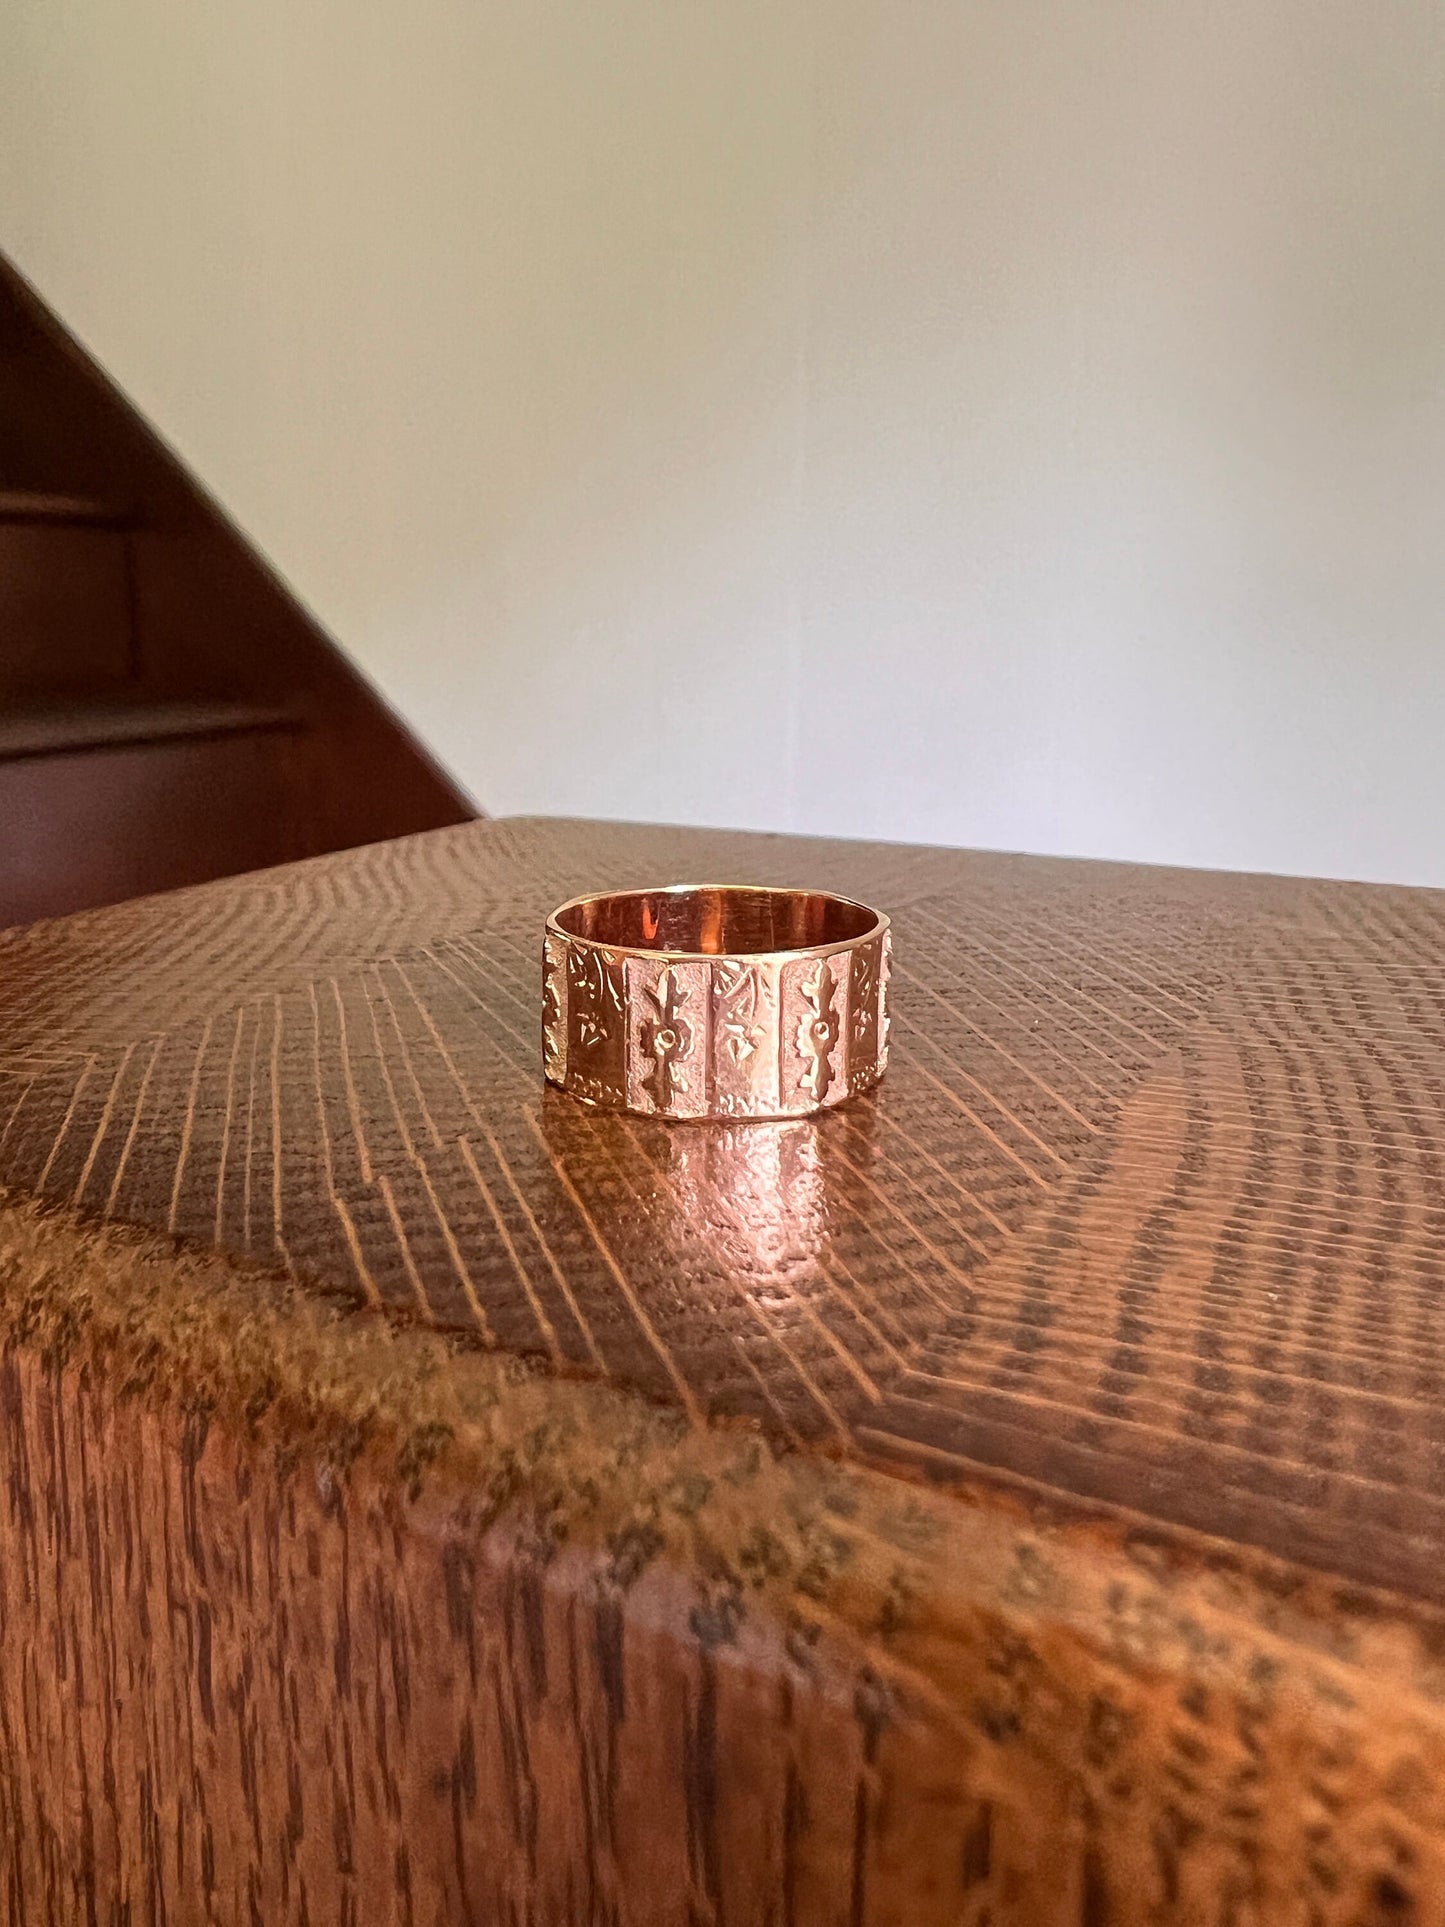 FLORAL Victorian Forget Me Not Beveled 9mm Wide Cigar Band Ring Antique 10k Rose Gold Solid Eternity Stacker Romantic Gift Chunky Engraved